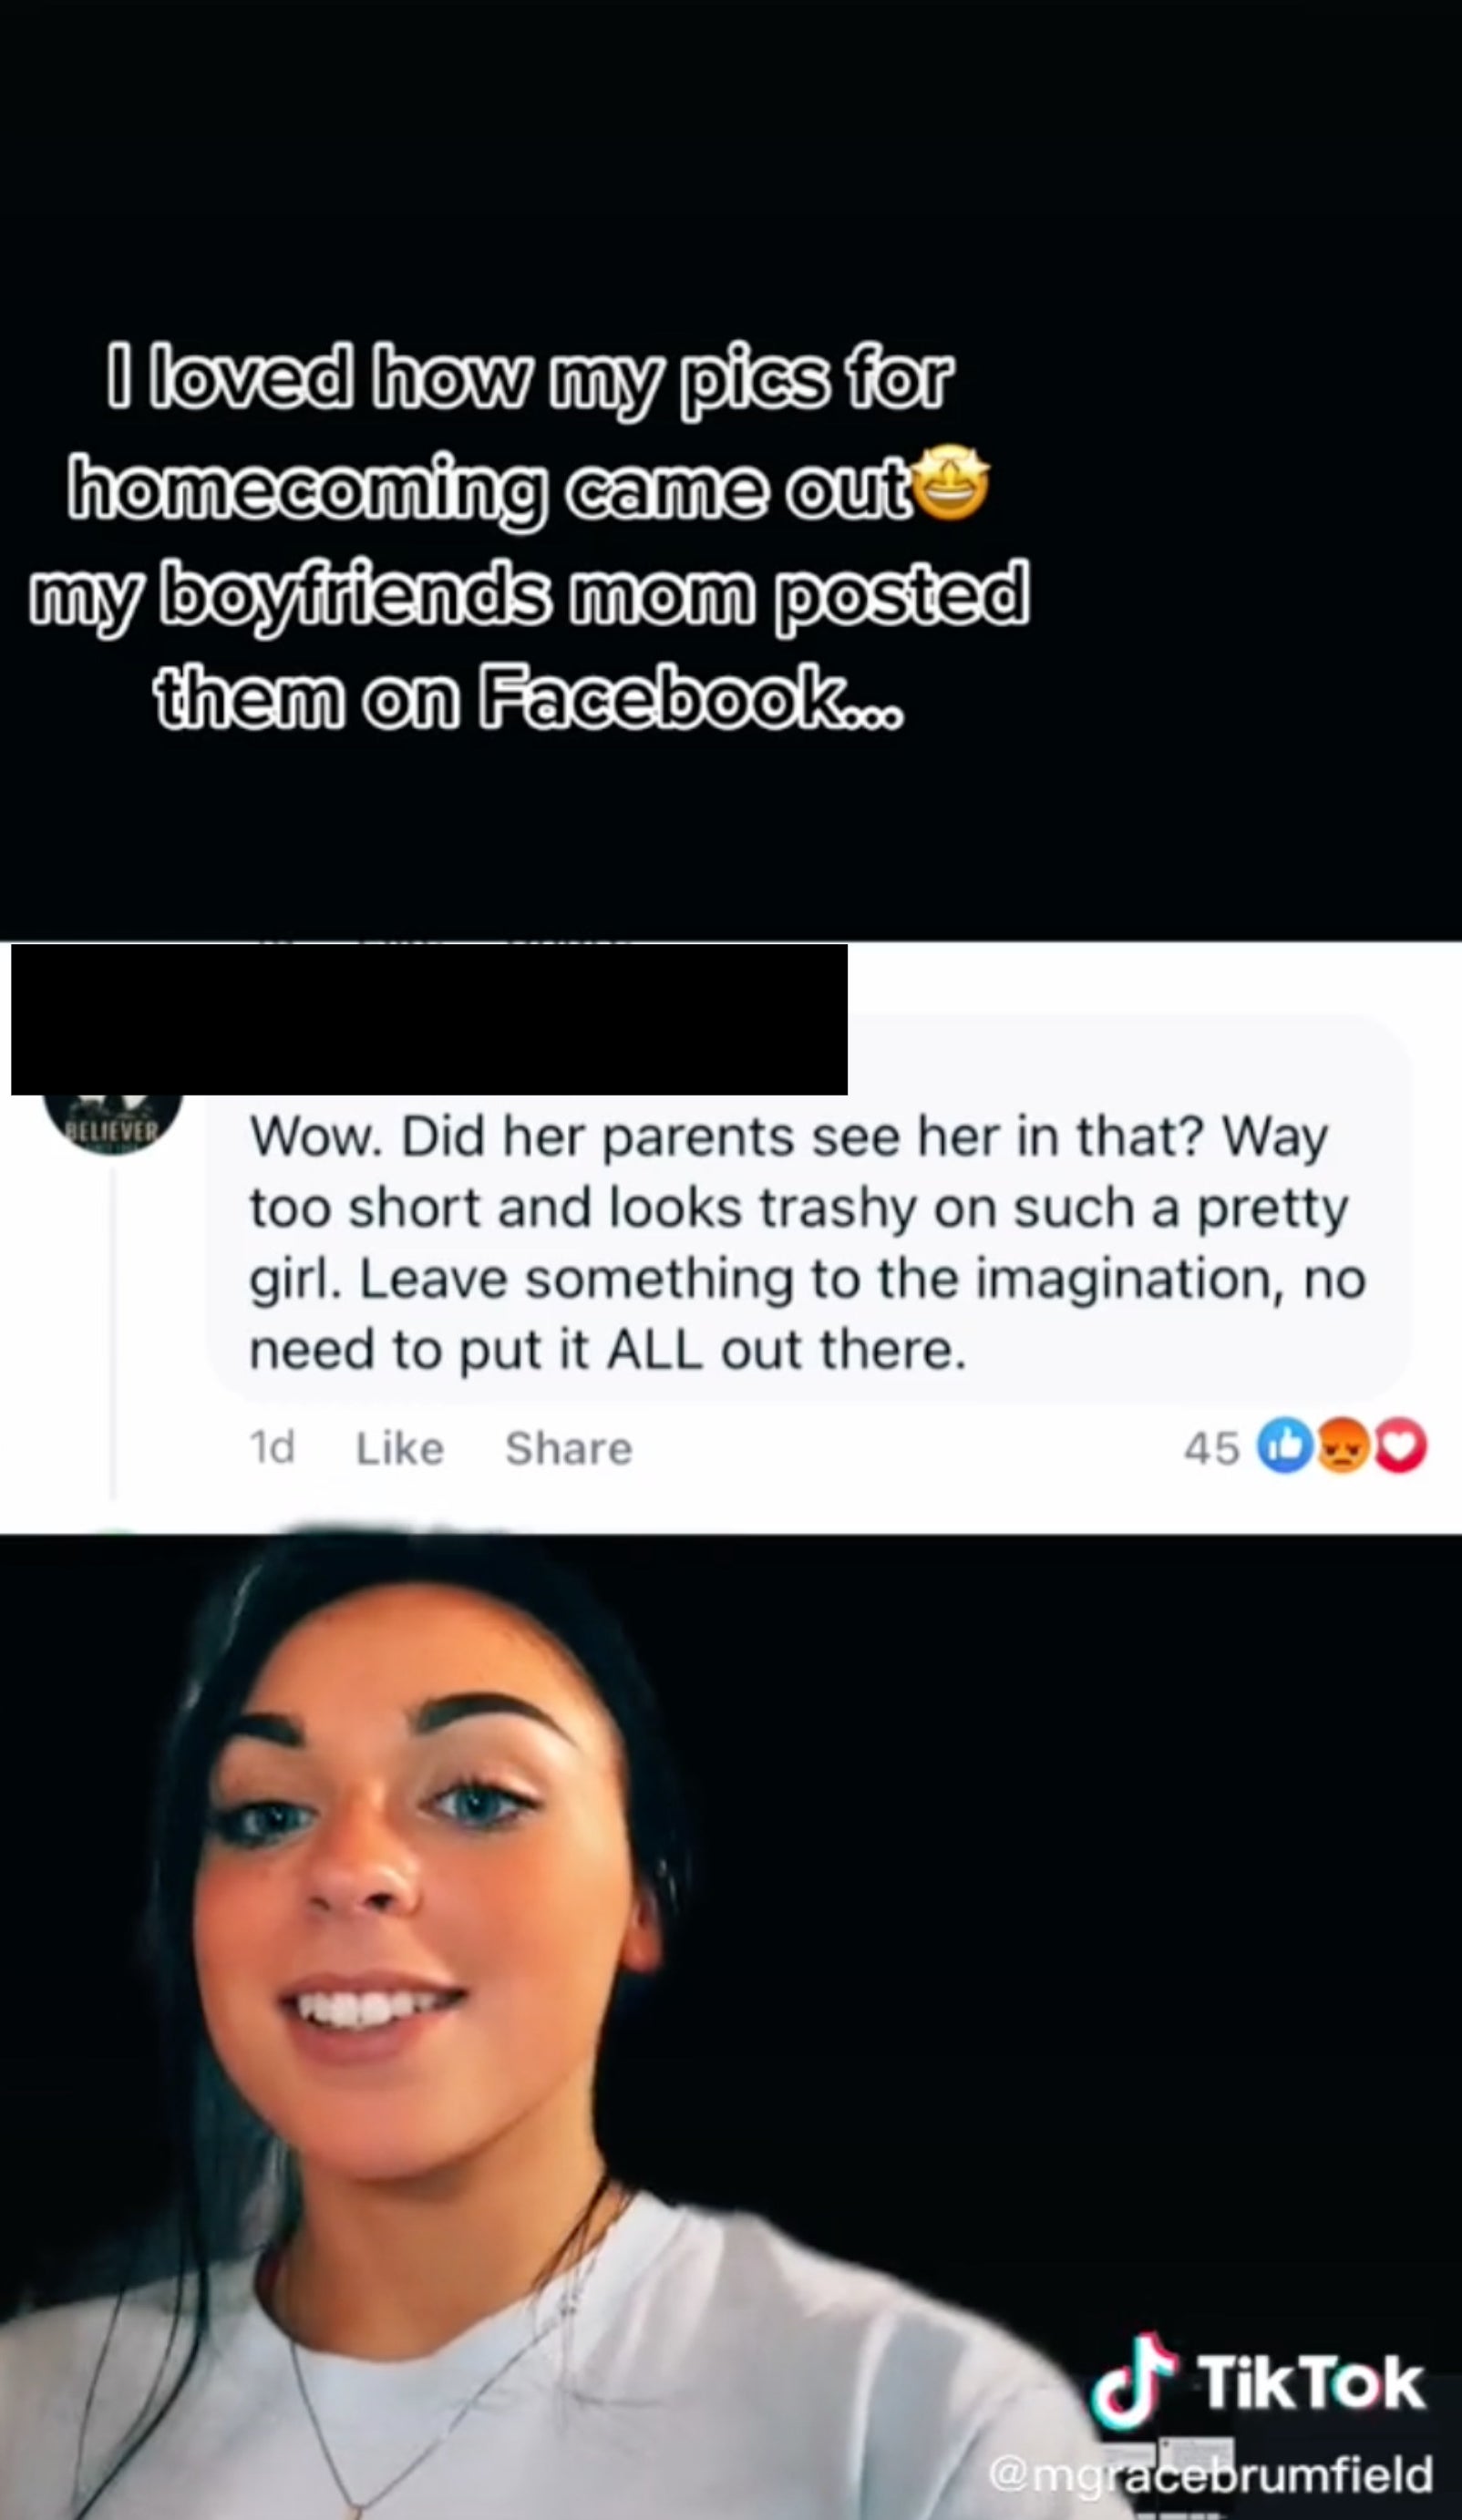 Grace smiling below the comment &quot;Wow, did her parents see her in that? Way too short and looks trashy on such a pretty girl. Leave something to the imagination, no need to put it ALL out there&quot;